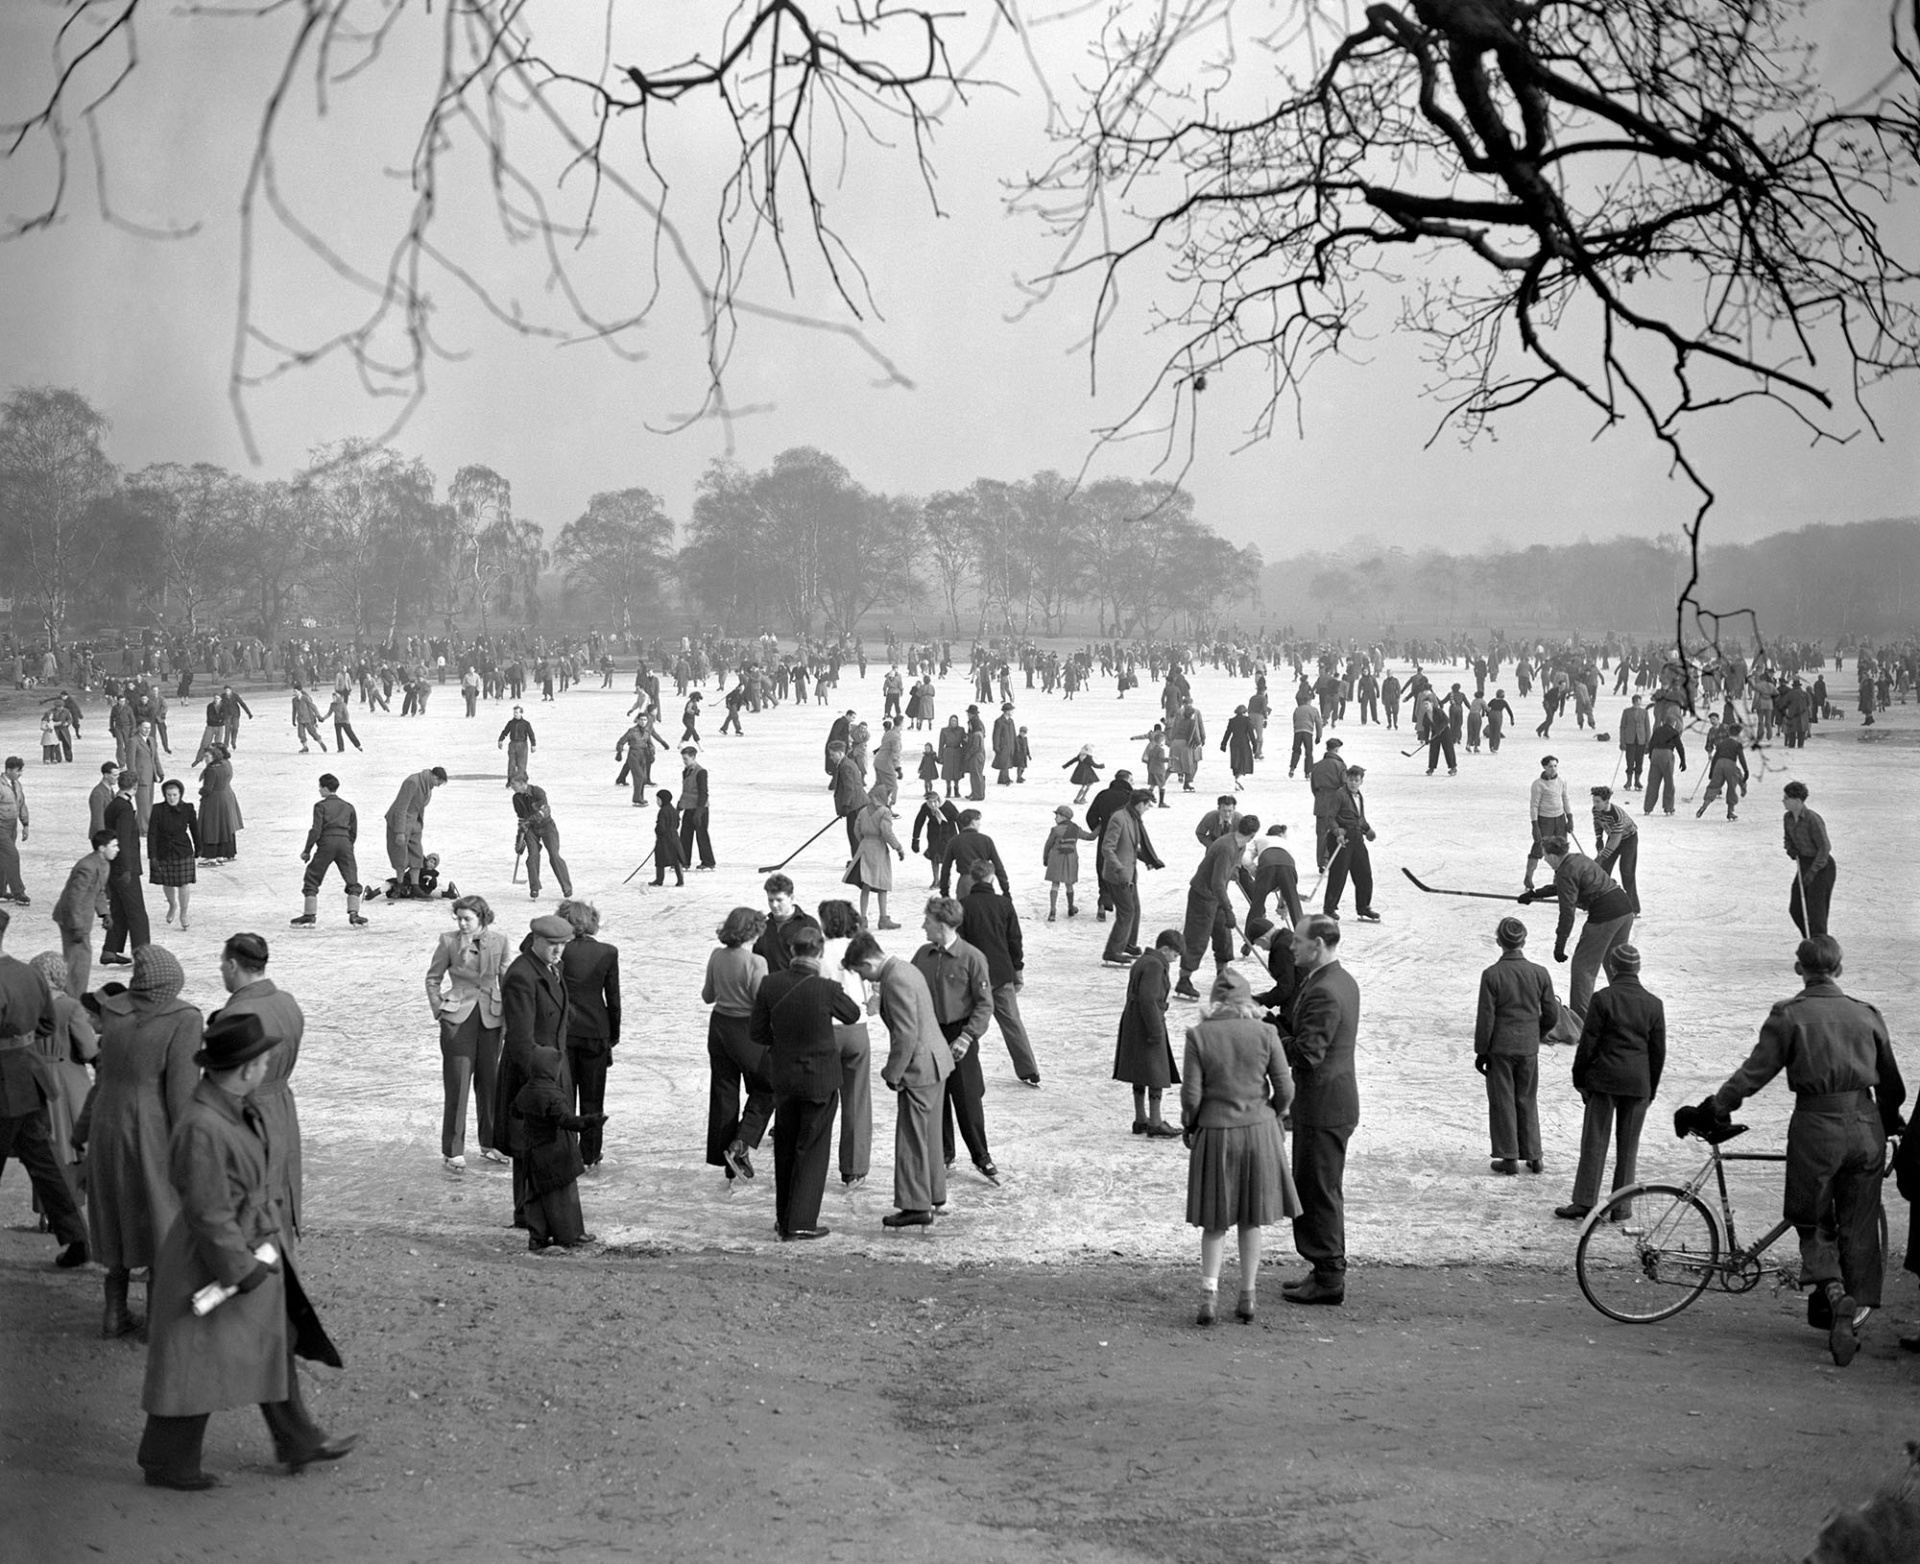 People ice skating and playing ice hockey on the frozen Wimbledon Common Pond, 1950